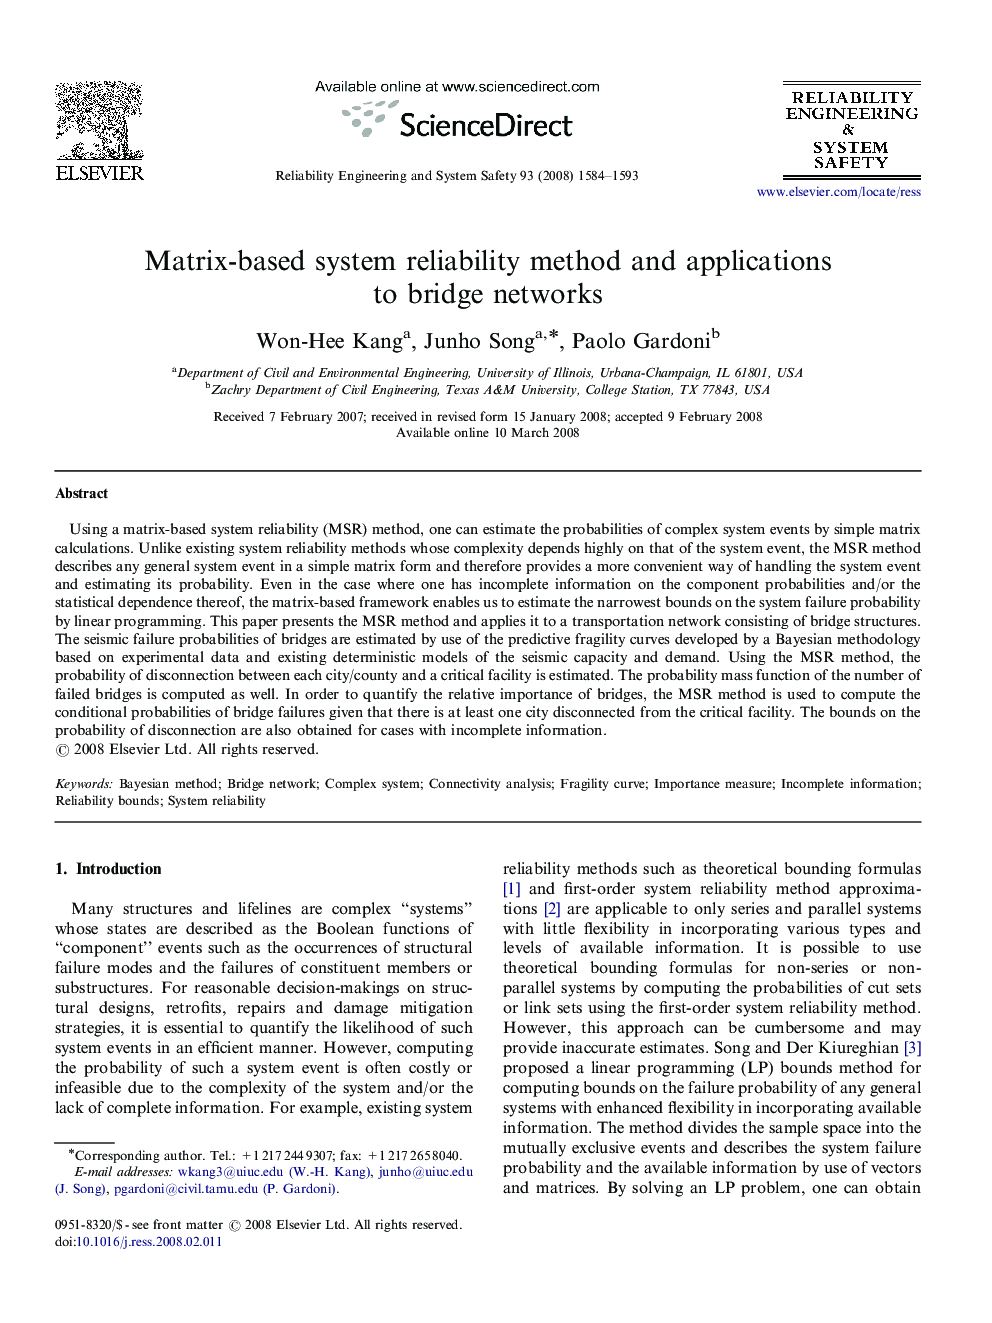 Matrix-based system reliability method and applications to bridge networks